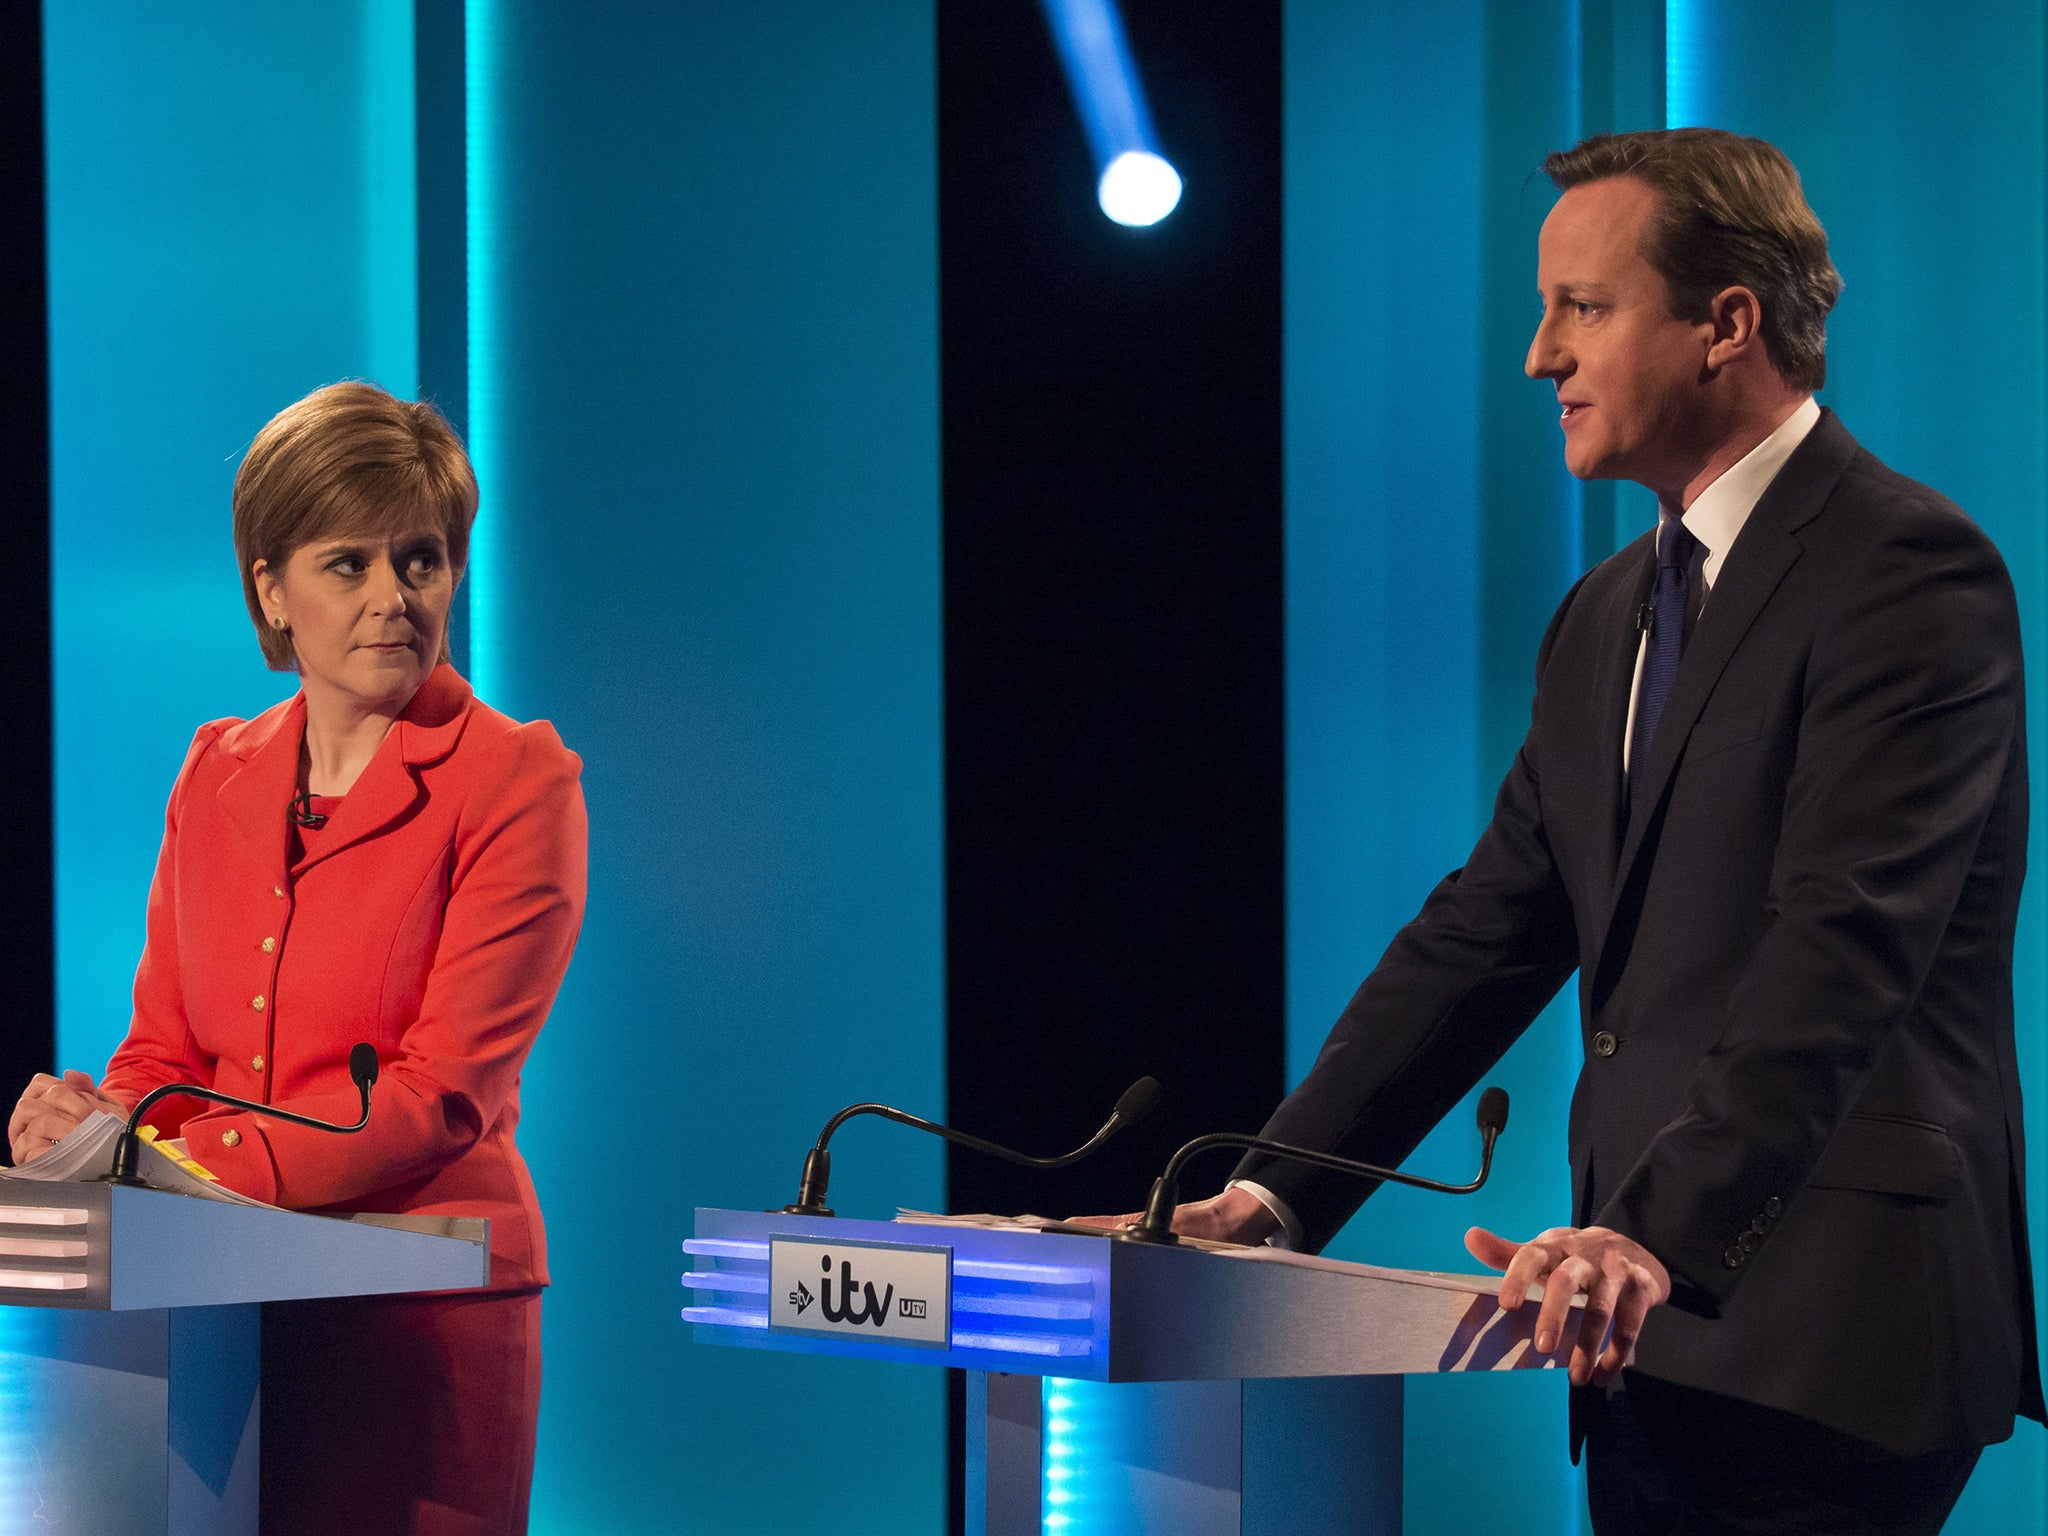 Nicola Sturgeon is reported to have said she’d rather see “David Cameron remain as PM”